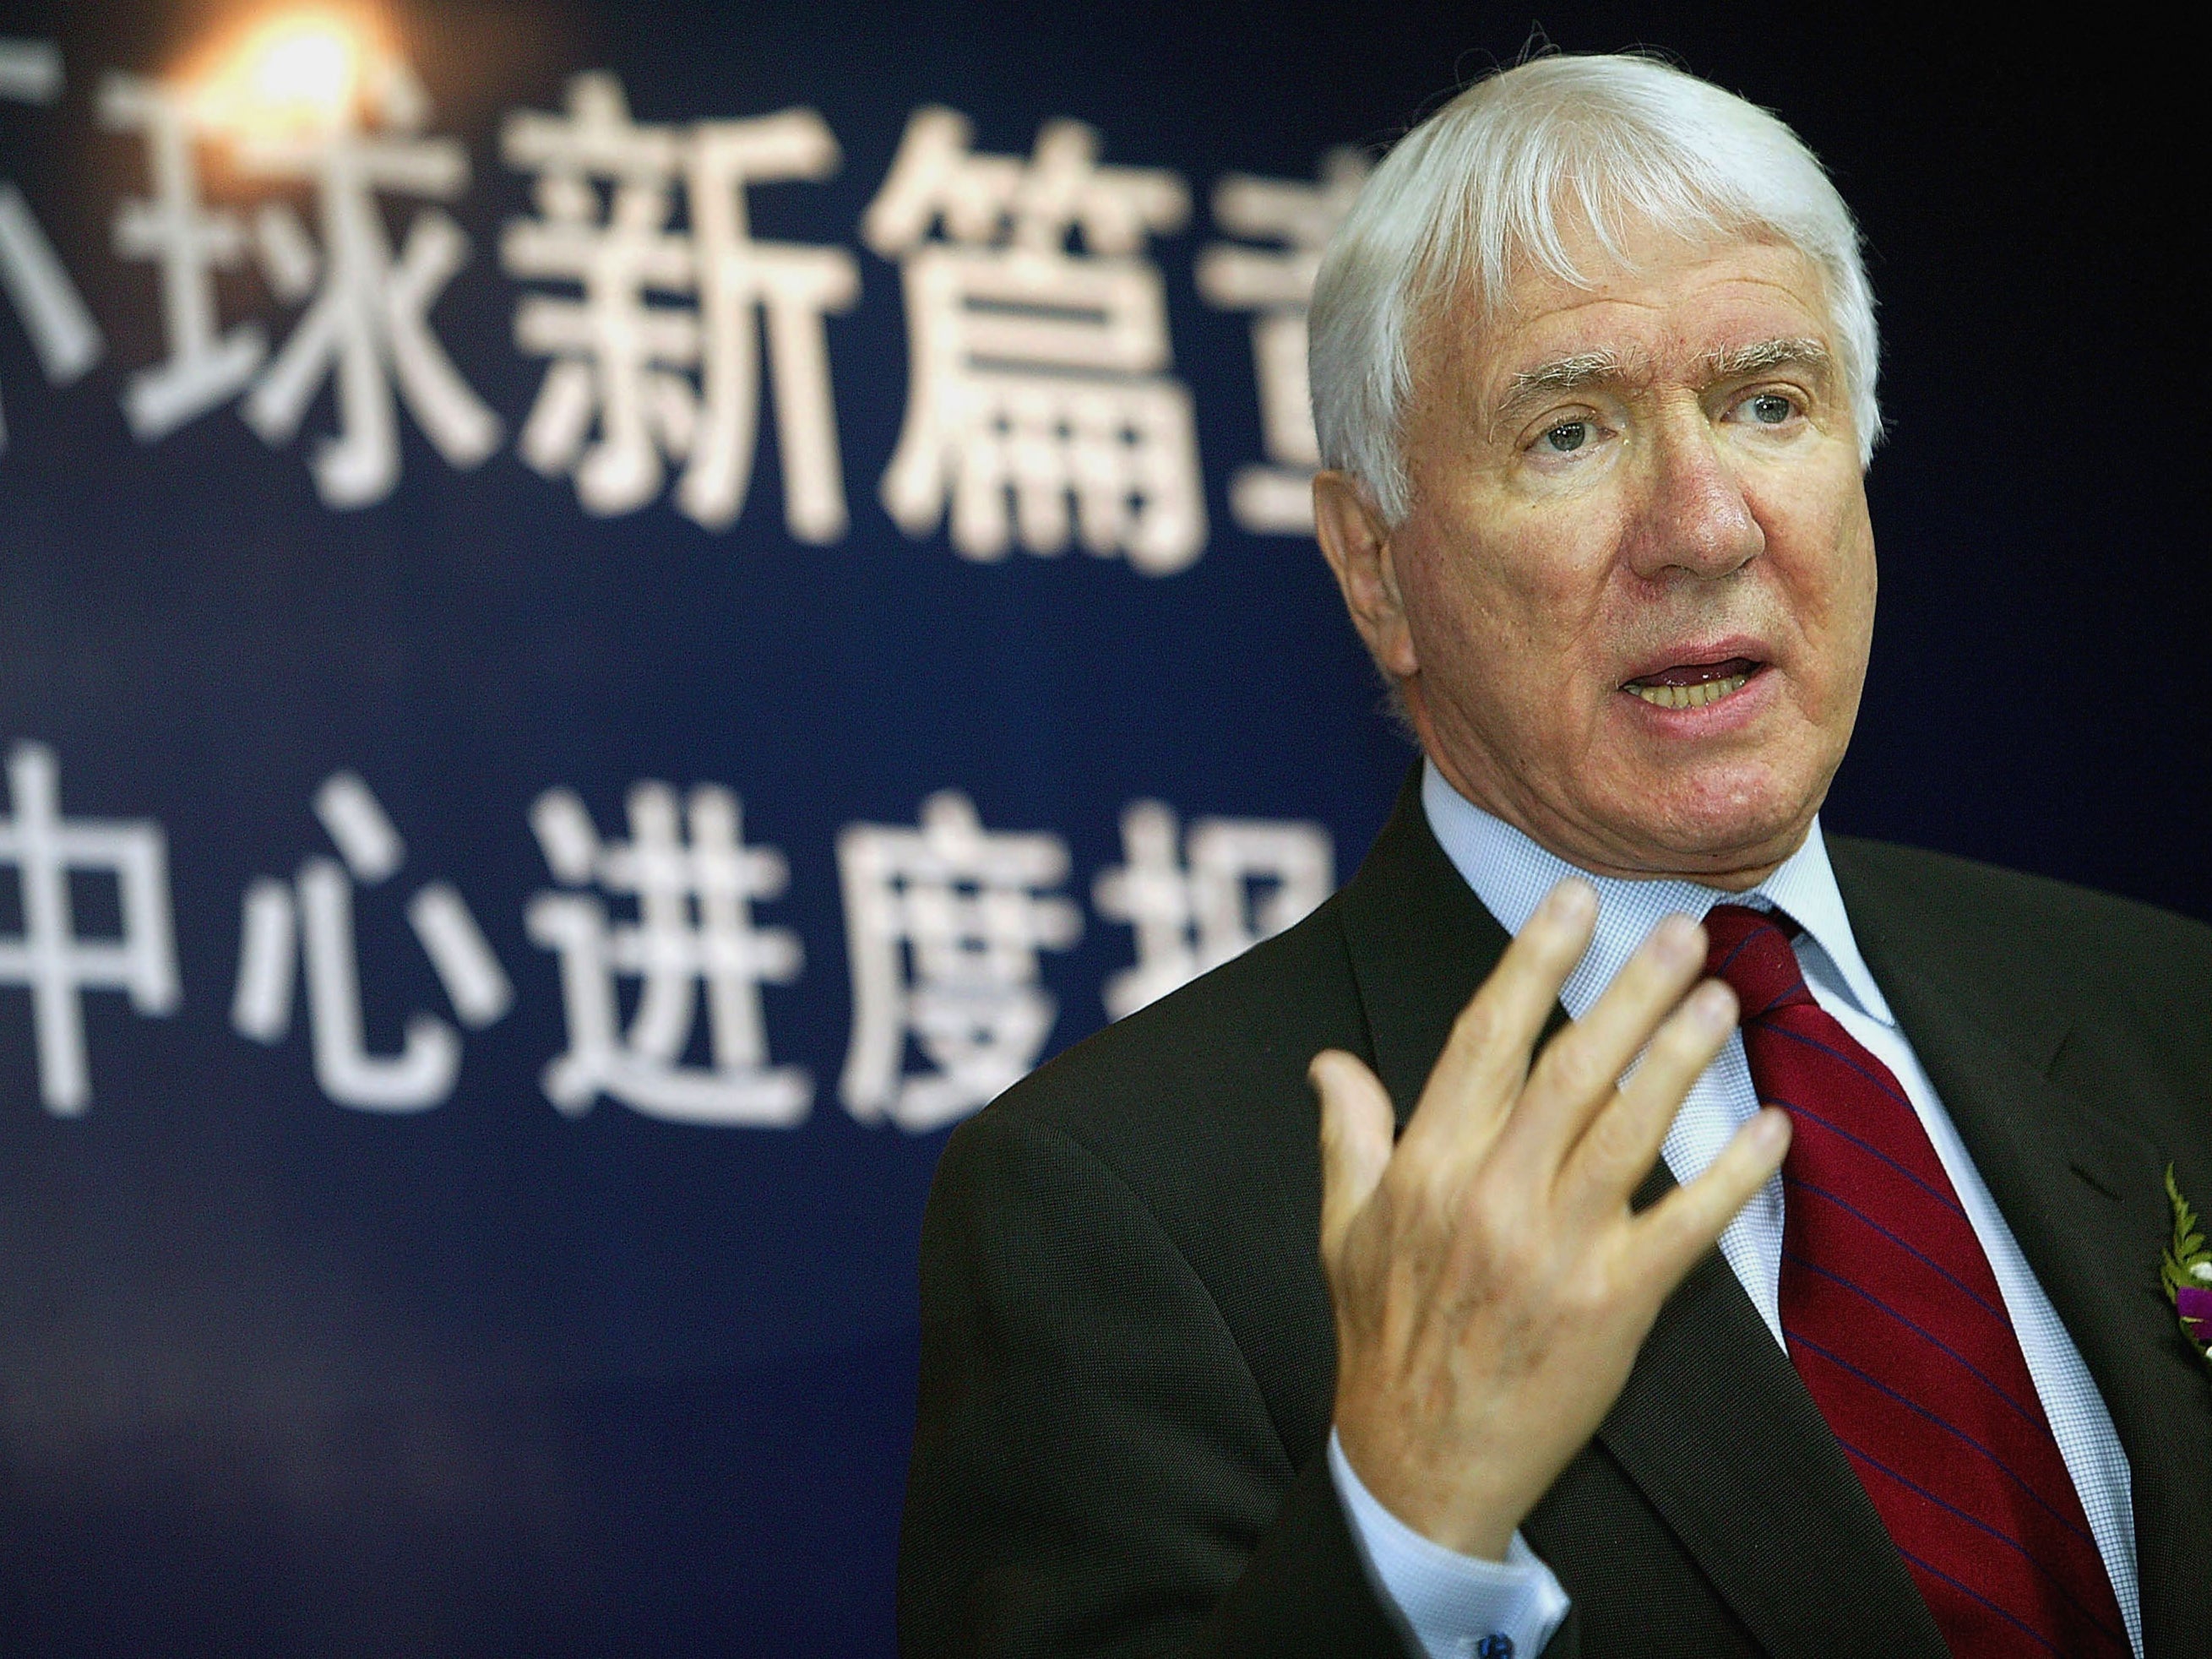 Kohn attends a press conference to discuss construction of the Shanghai World Financial Centre in 2005